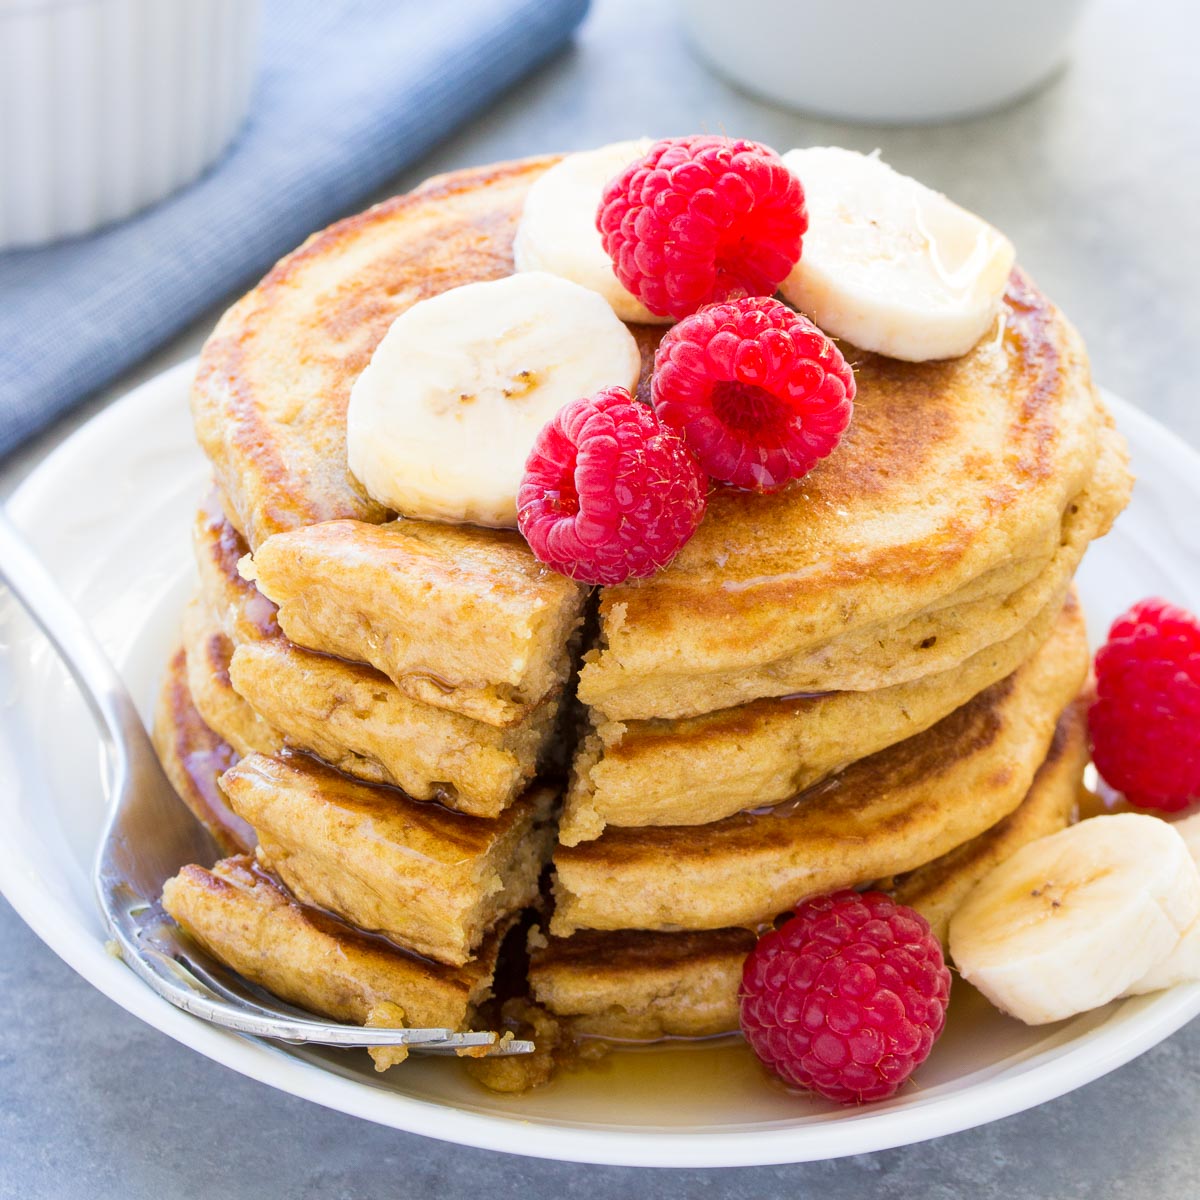 IV. Step-by-Step Guide to Making Homemade Pancakes